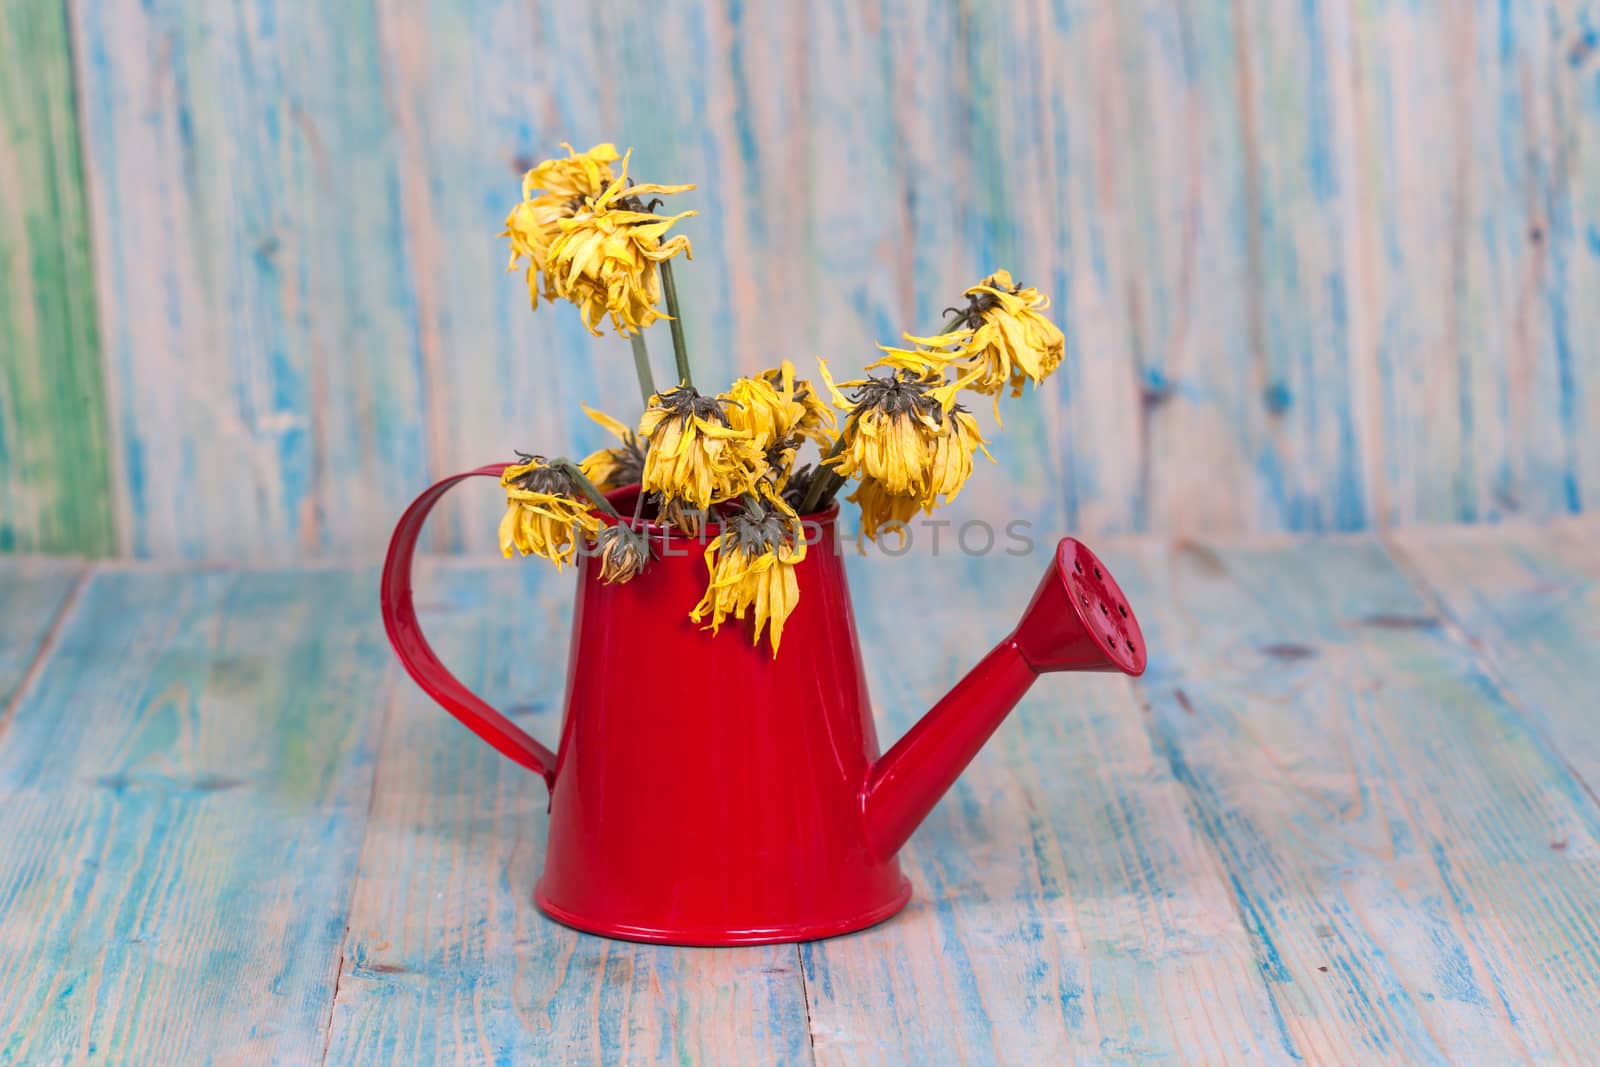 flowers with leaves in watering can on wood